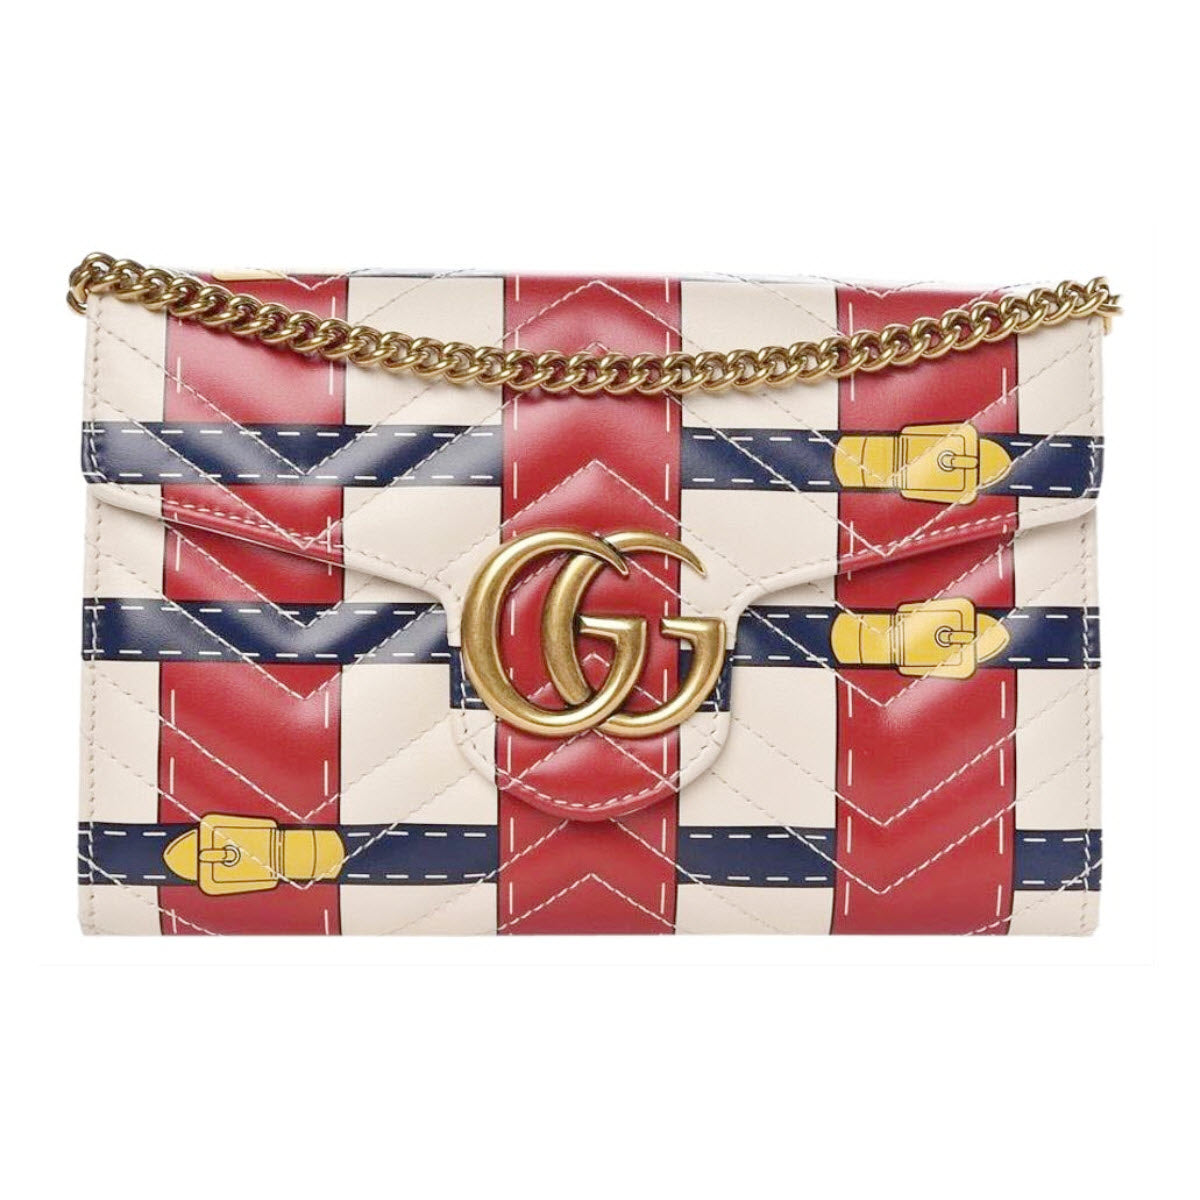 Gucci Marmont Chain Wallet Trompe L'oeil Red White Blue Leather